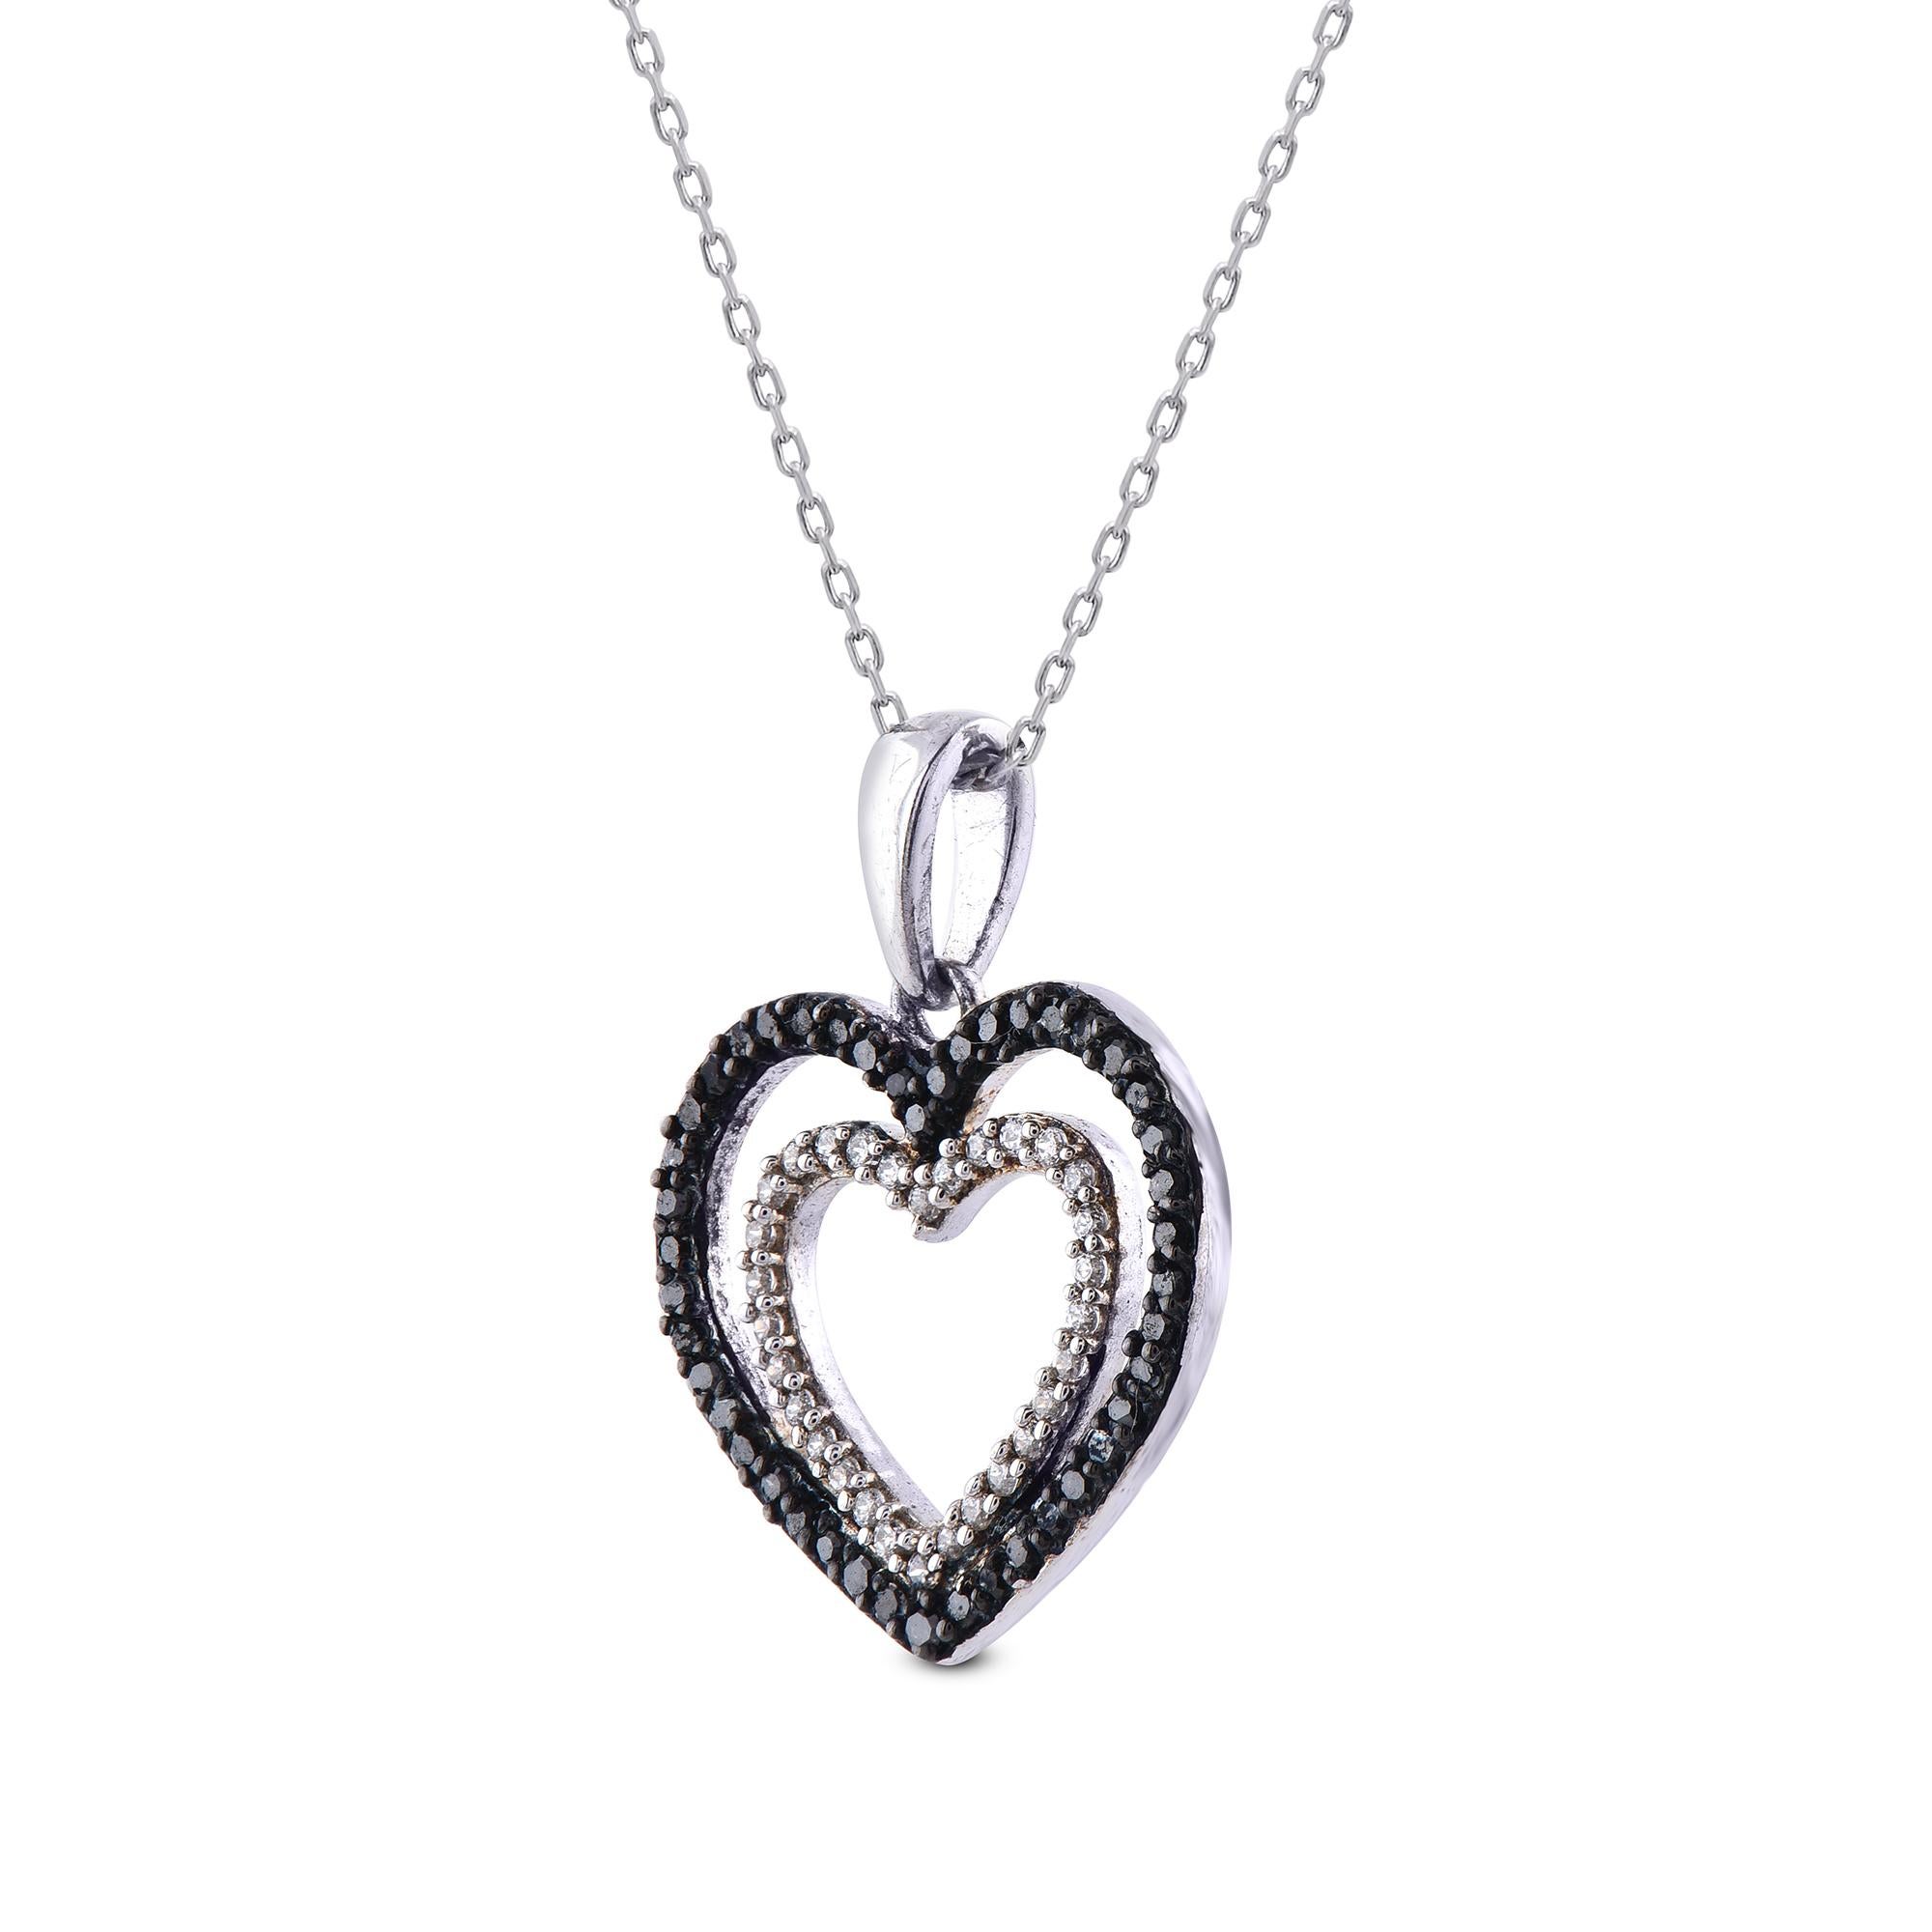 This Double heart pendant is expertly crafted in 14 Karat White Gold and features 30 round white diamond HI colour / I2 clarity and 44 black diamonds set in prong setting. This pendant has high polish finish and is a valuable addition to any jewelry